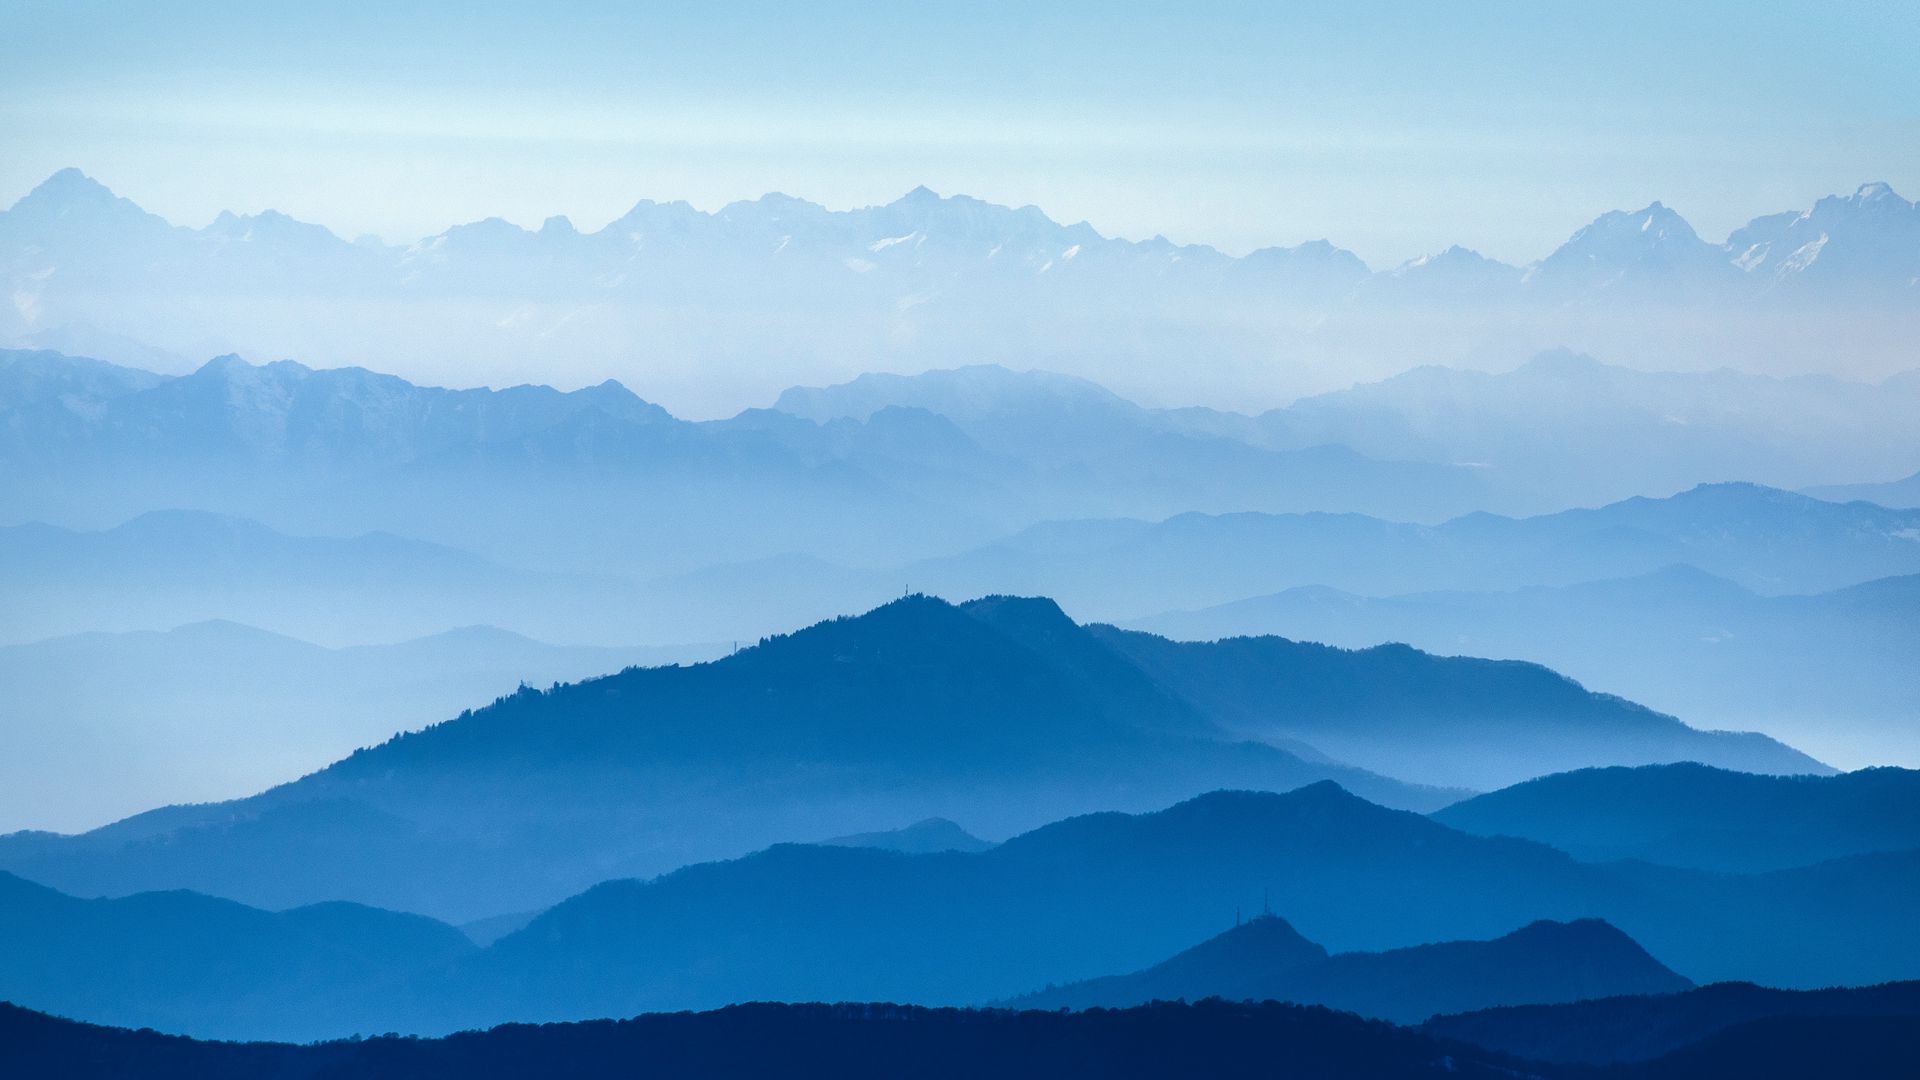 Download wallpaper 1920x1080 mountains, fog, sky, blue, white full hd,  hdtv, fhd, 1080p hd background